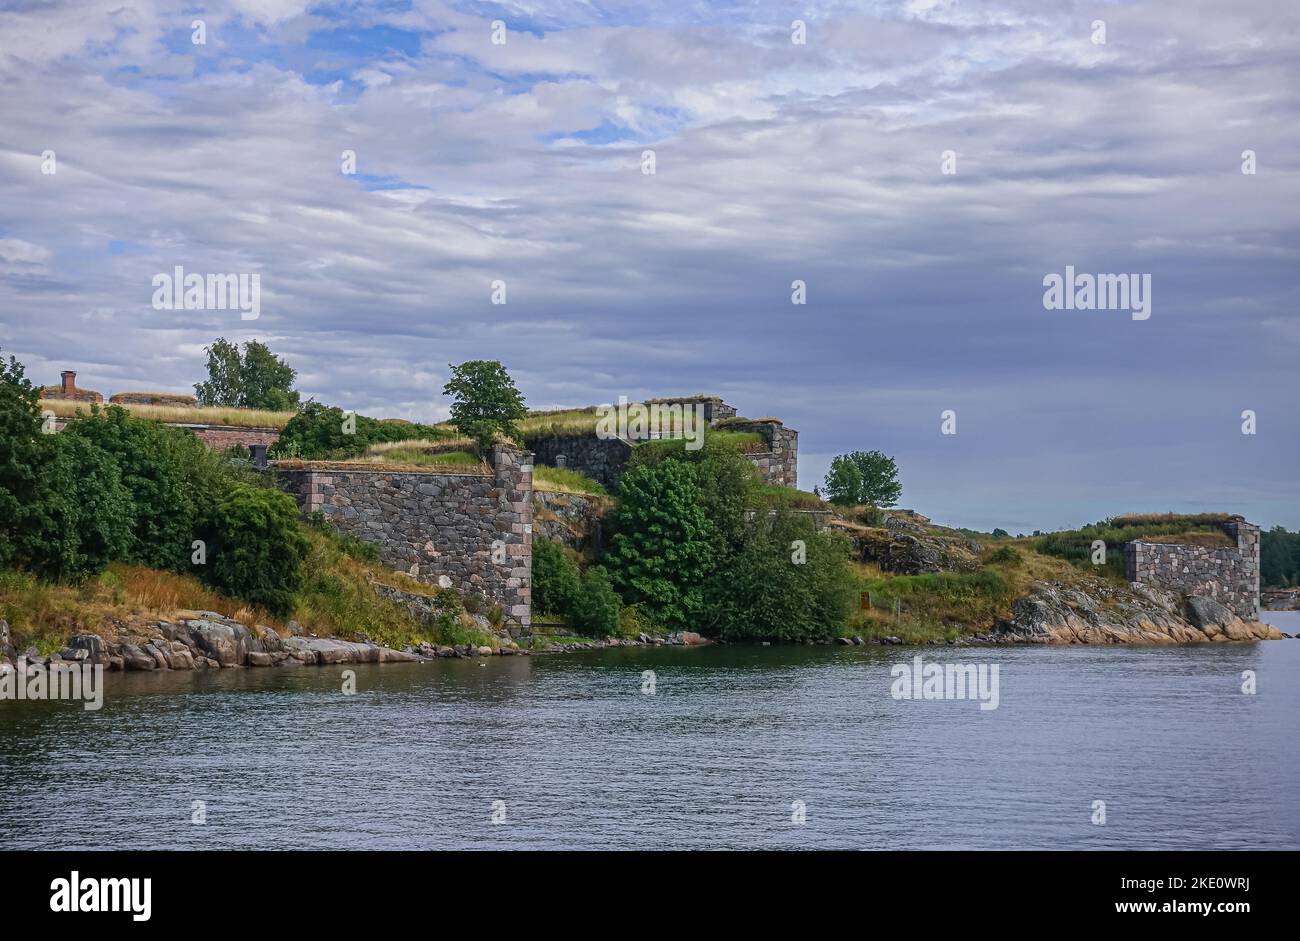 Helsinki, Finland - July 19, 2022: Suomenlinna Fortress. Wrede Bastion ramparts under blue-gray cloudscape with green vegetation close to water line. Stock Photo